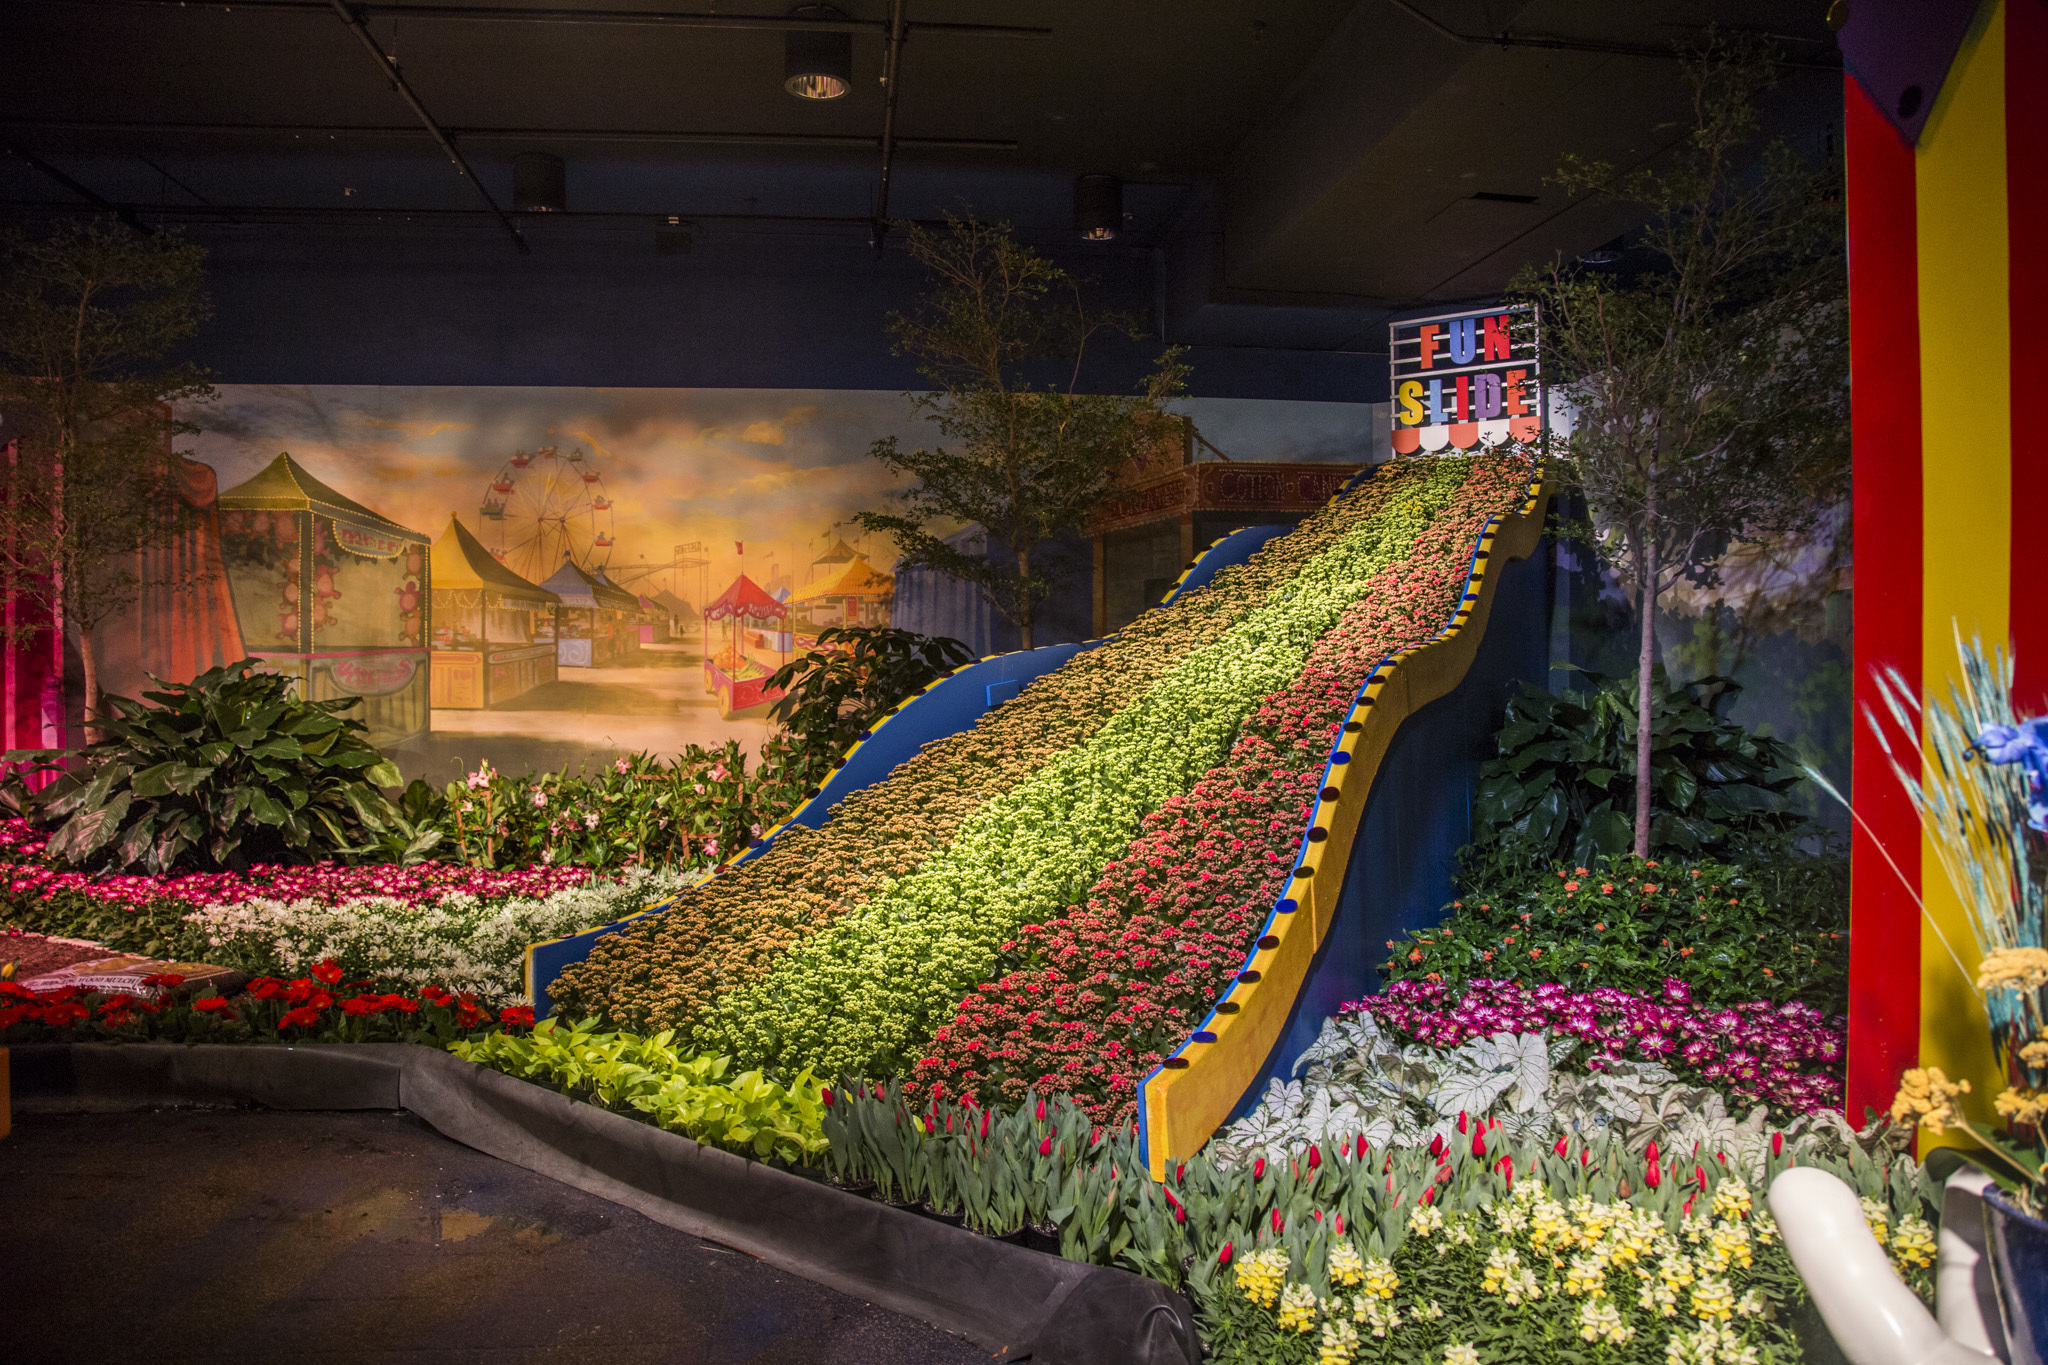 See Macy's in full bloom at the annual Flower Show